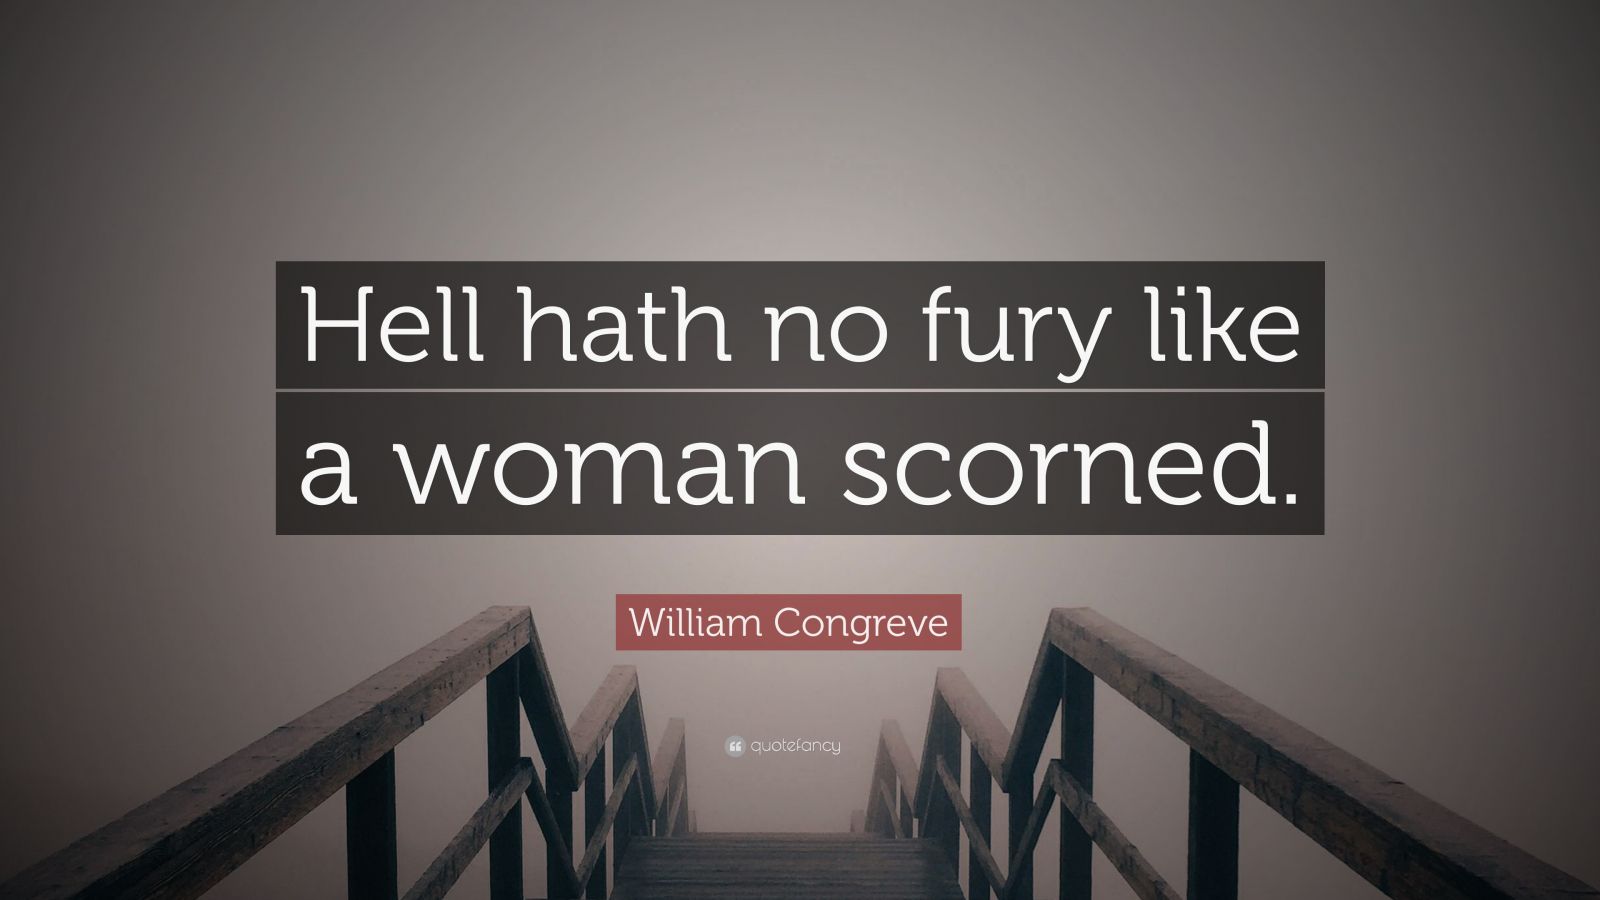 William Congreve Quote “hell Hath No Fury Like A Woman Scorned” 12 Wallpapers Quotefancy